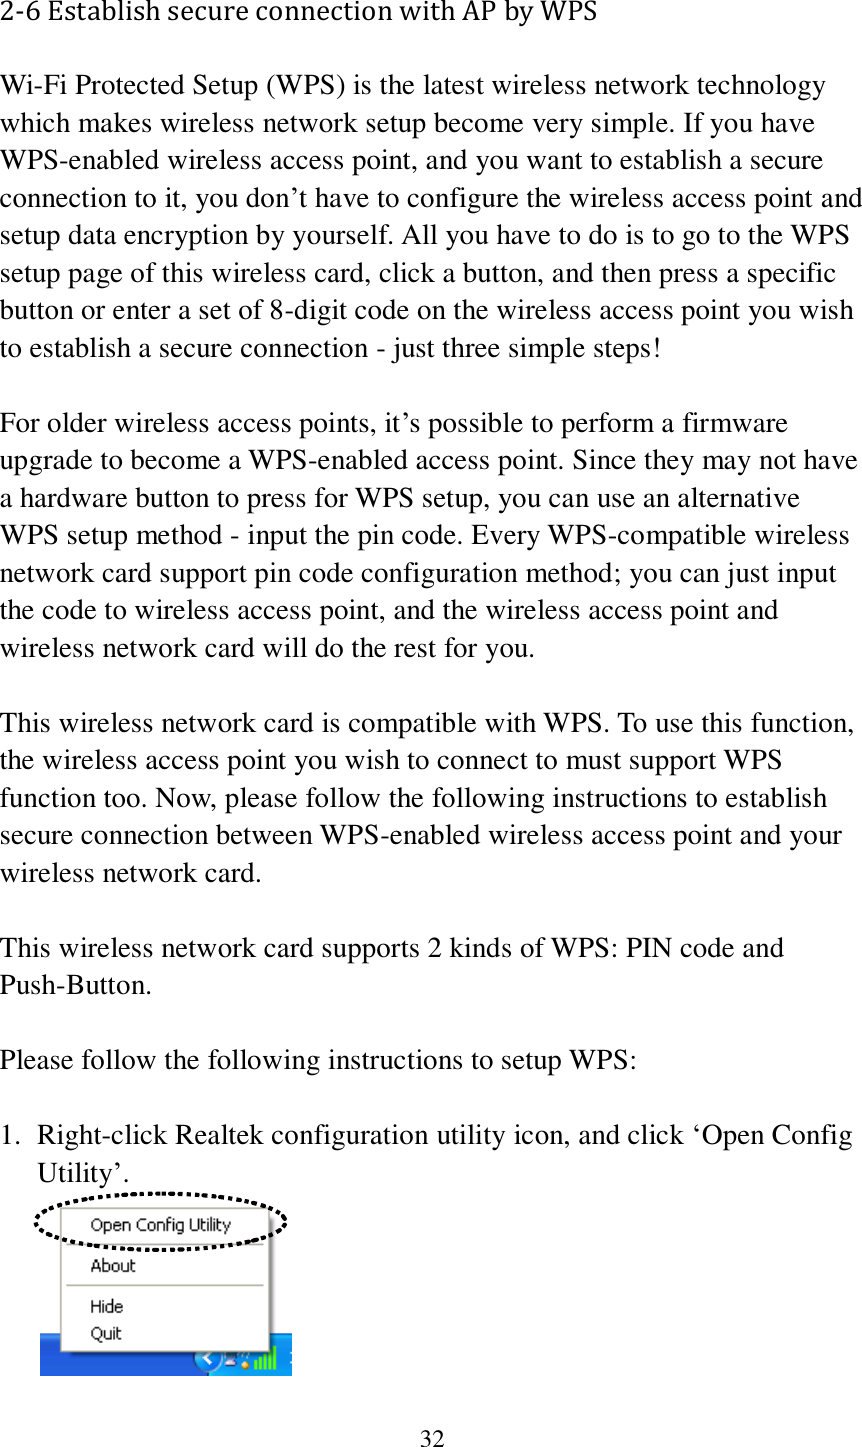  32 2-6 Establish secure connection with AP by WPS Wi-Fi Protected Setup (WPS) is the latest wireless network technology which makes wireless network setup become very simple. If you have WPS-enabled wireless access point, and you want to establish a secure connection to it, you don’t have to configure the wireless access point and setup data encryption by yourself. All you have to do is to go to the WPS setup page of this wireless card, click a button, and then press a specific button or enter a set of 8-digit code on the wireless access point you wish to establish a secure connection - just three simple steps!    For older wireless access points, it’s possible to perform a firmware upgrade to become a WPS-enabled access point. Since they may not have a hardware button to press for WPS setup, you can use an alternative WPS setup method - input the pin code. Every WPS-compatible wireless network card support pin code configuration method; you can just input the code to wireless access point, and the wireless access point and wireless network card will do the rest for you.  This wireless network card is compatible with WPS. To use this function, the wireless access point you wish to connect to must support WPS function too. Now, please follow the following instructions to establish secure connection between WPS-enabled wireless access point and your wireless network card.  This wireless network card supports 2 kinds of WPS: PIN code and Push-Button.    Please follow the following instructions to setup WPS:  1. Right-click Realtek configuration utility icon, and click ‘Open Config Utility’.  